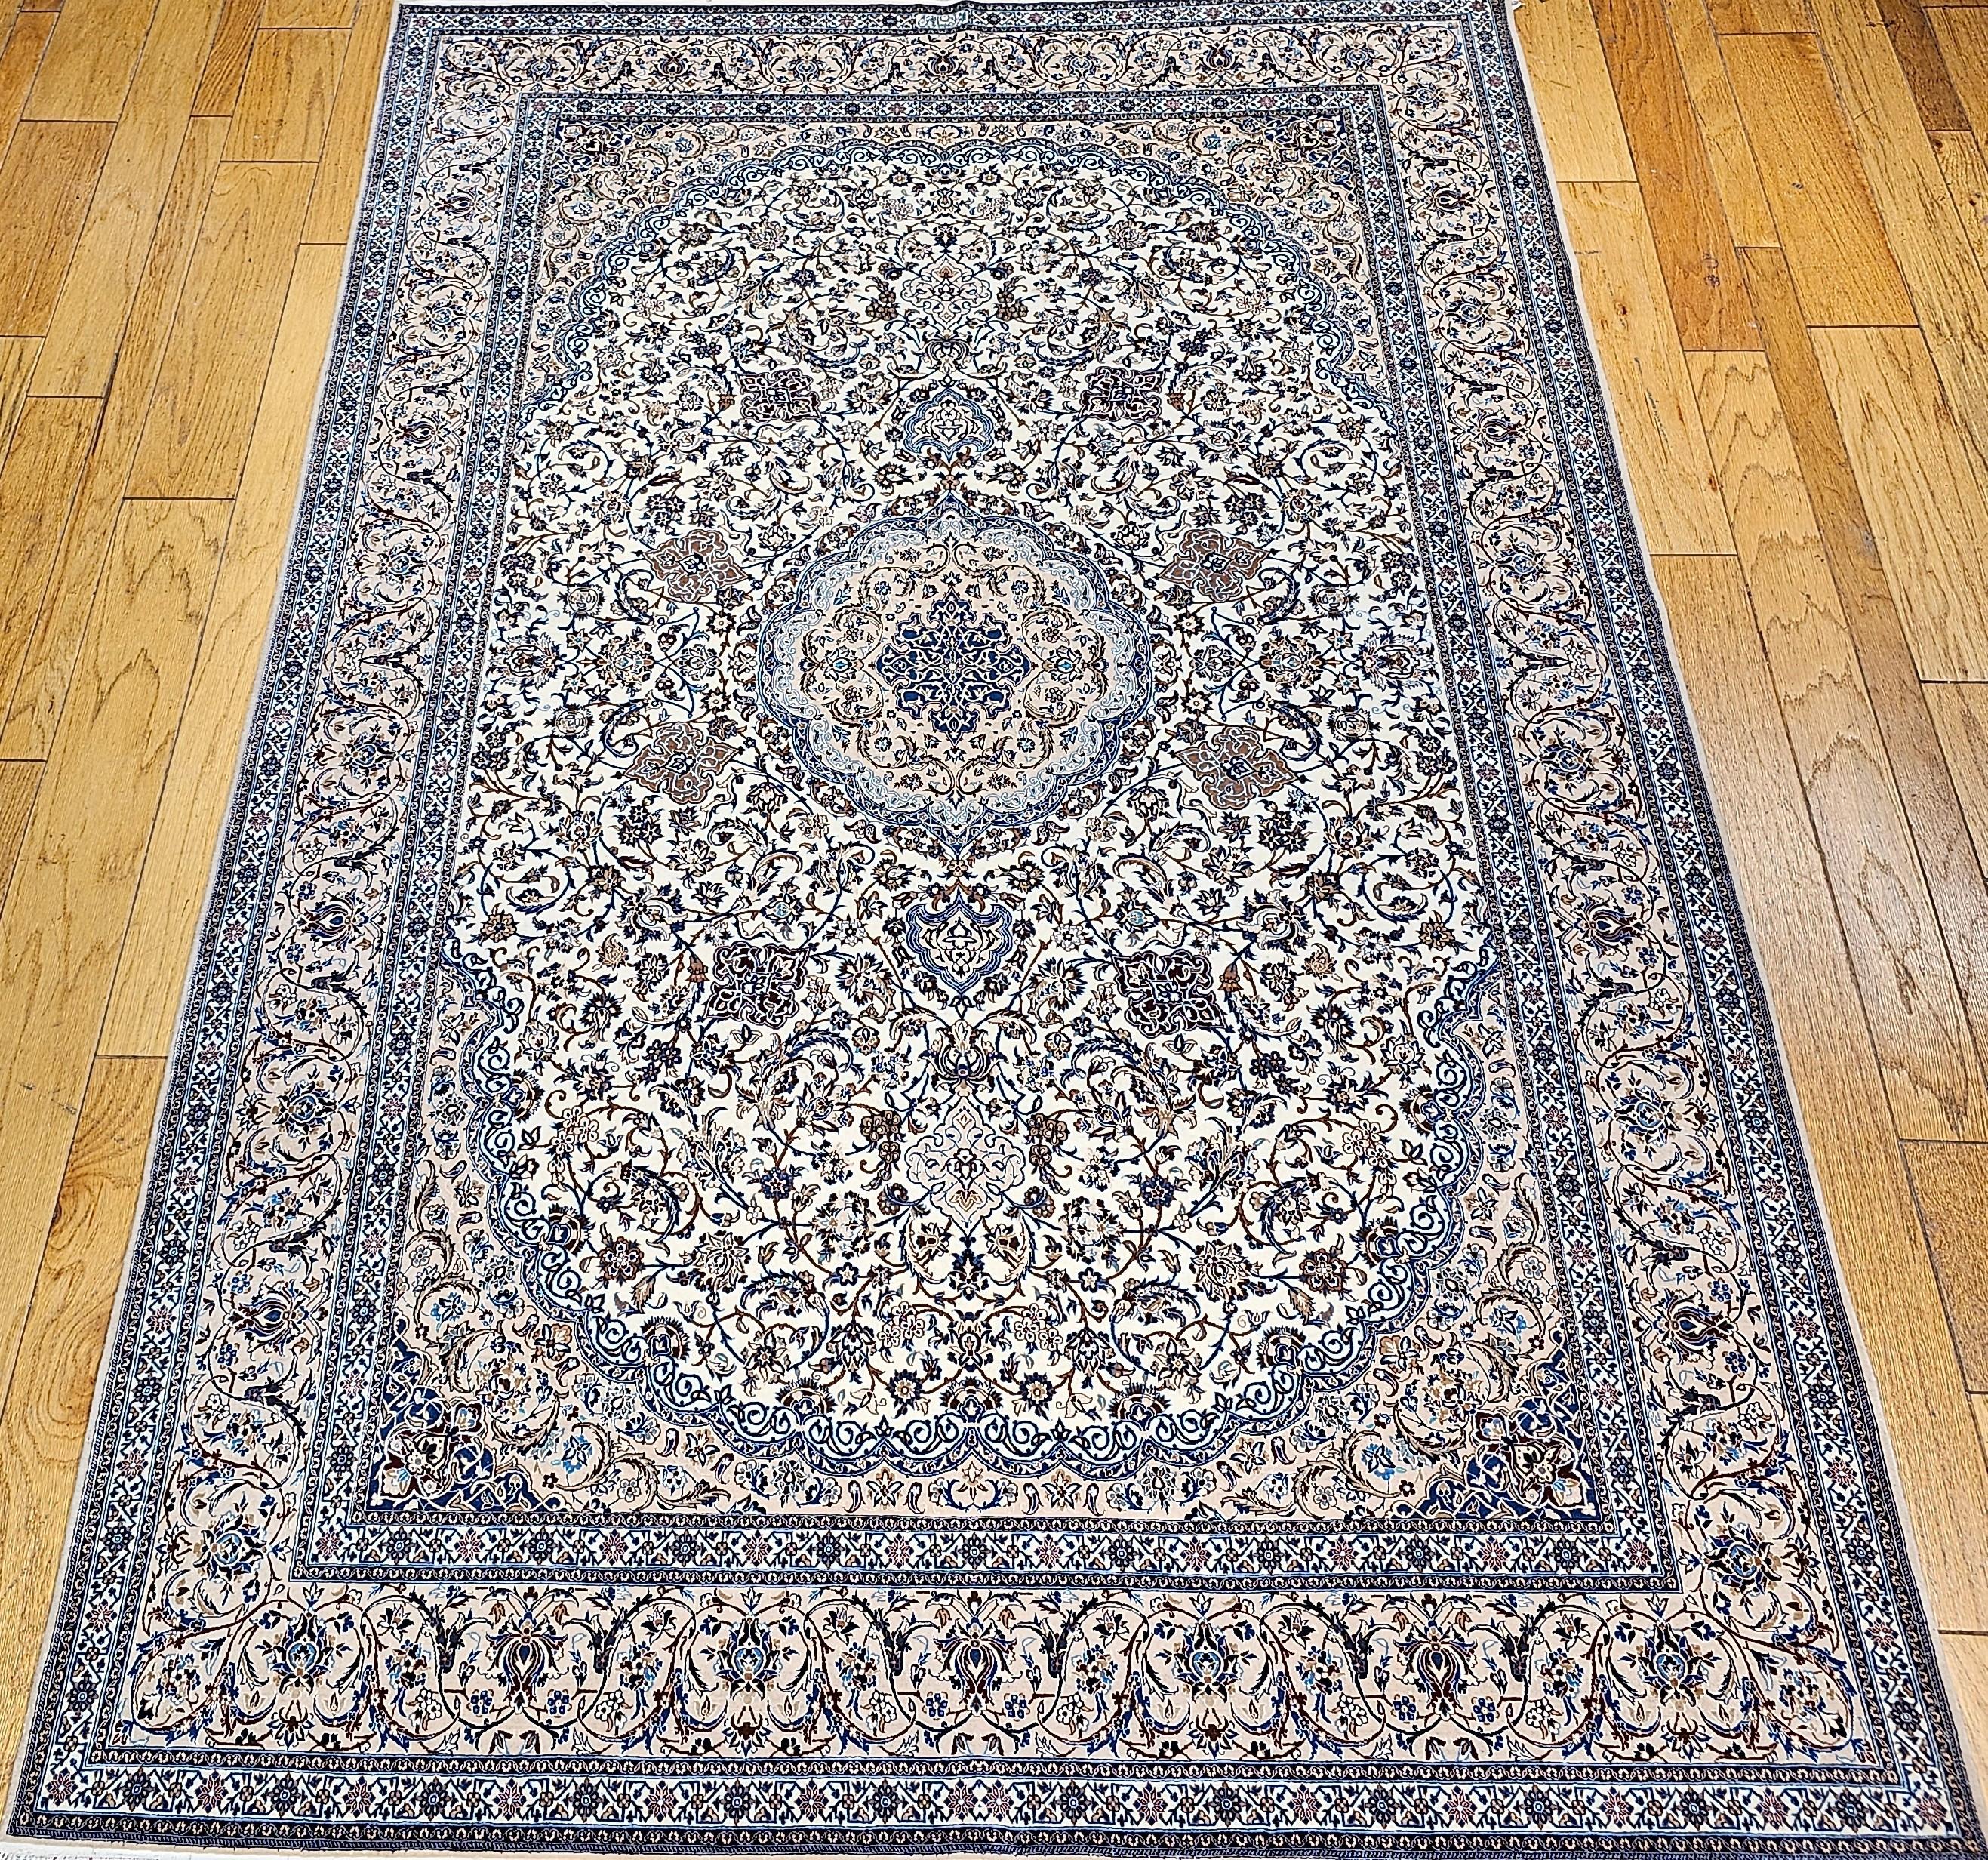 An extremely fine weave handwoven Nain area rug from the 4th quarter of the 1900s with a fine weave in ivory, pale blue.  This Nain has a beautiful floral design set in an ivory color field with a cream color border.  The design colors in the field